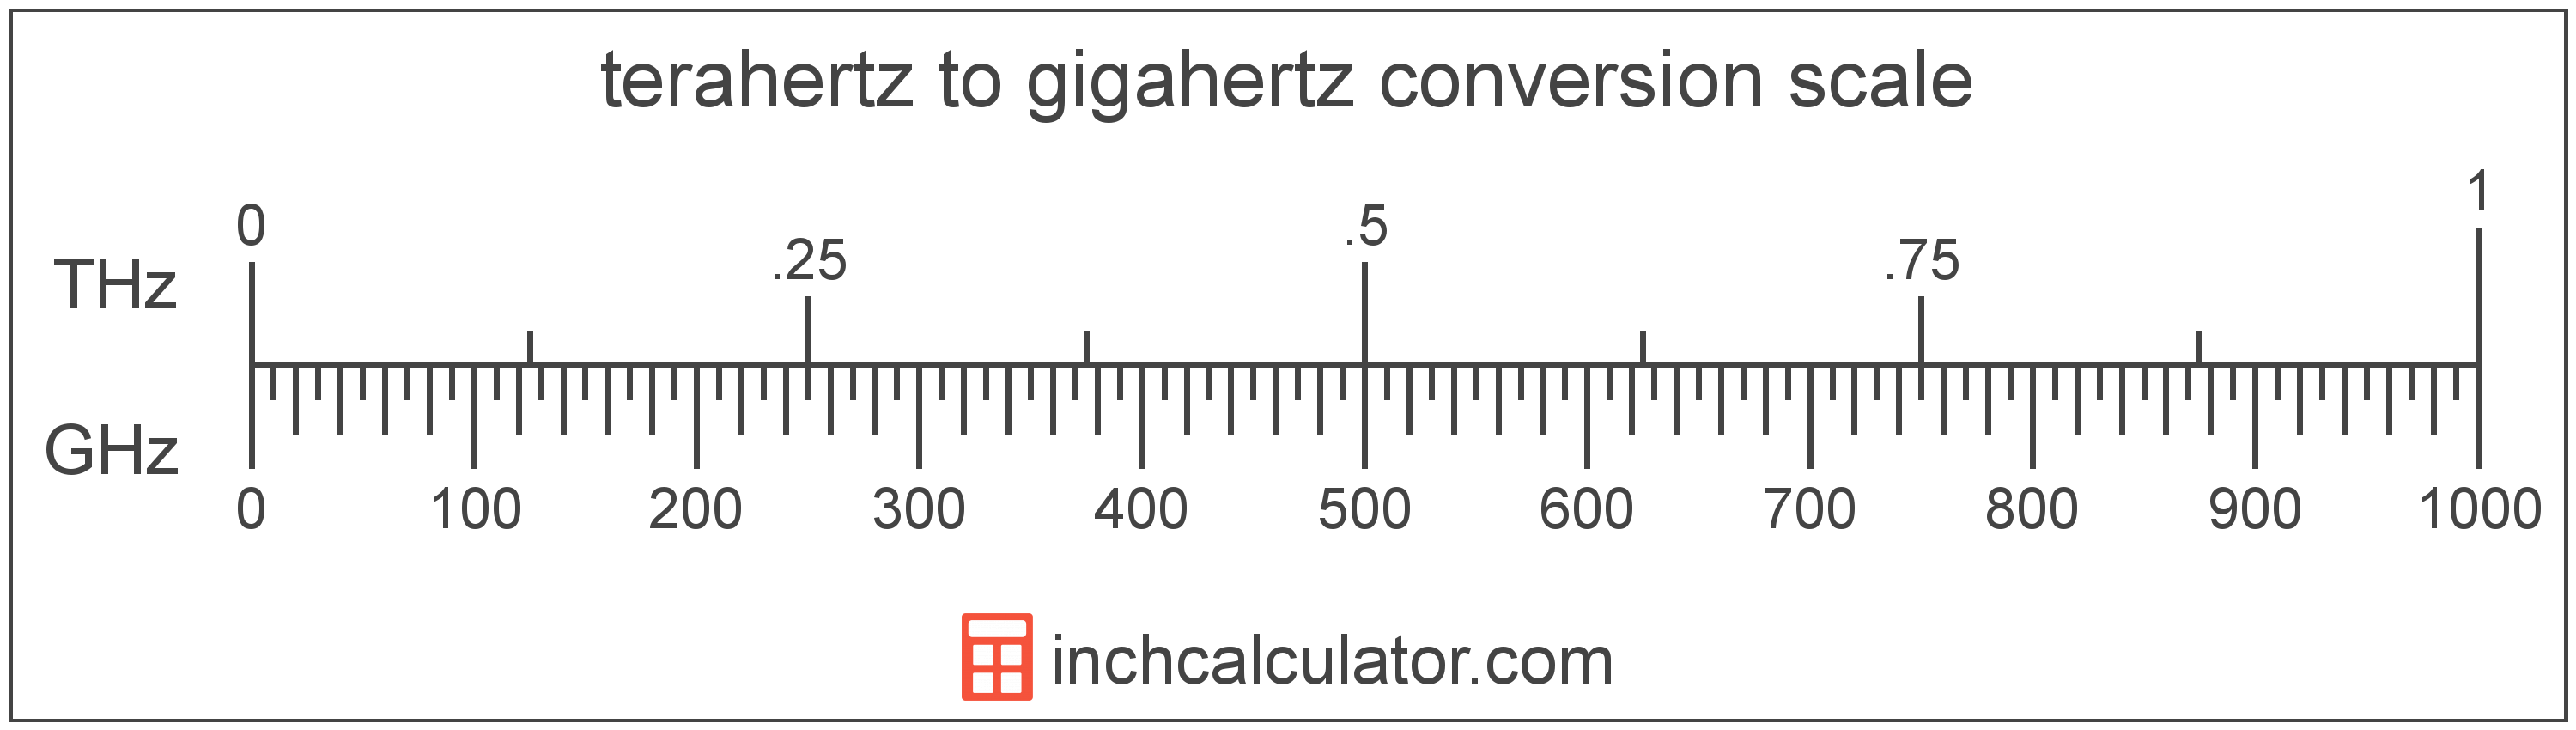 conversion scale showing gigahertz and equivalent terahertz frequency values